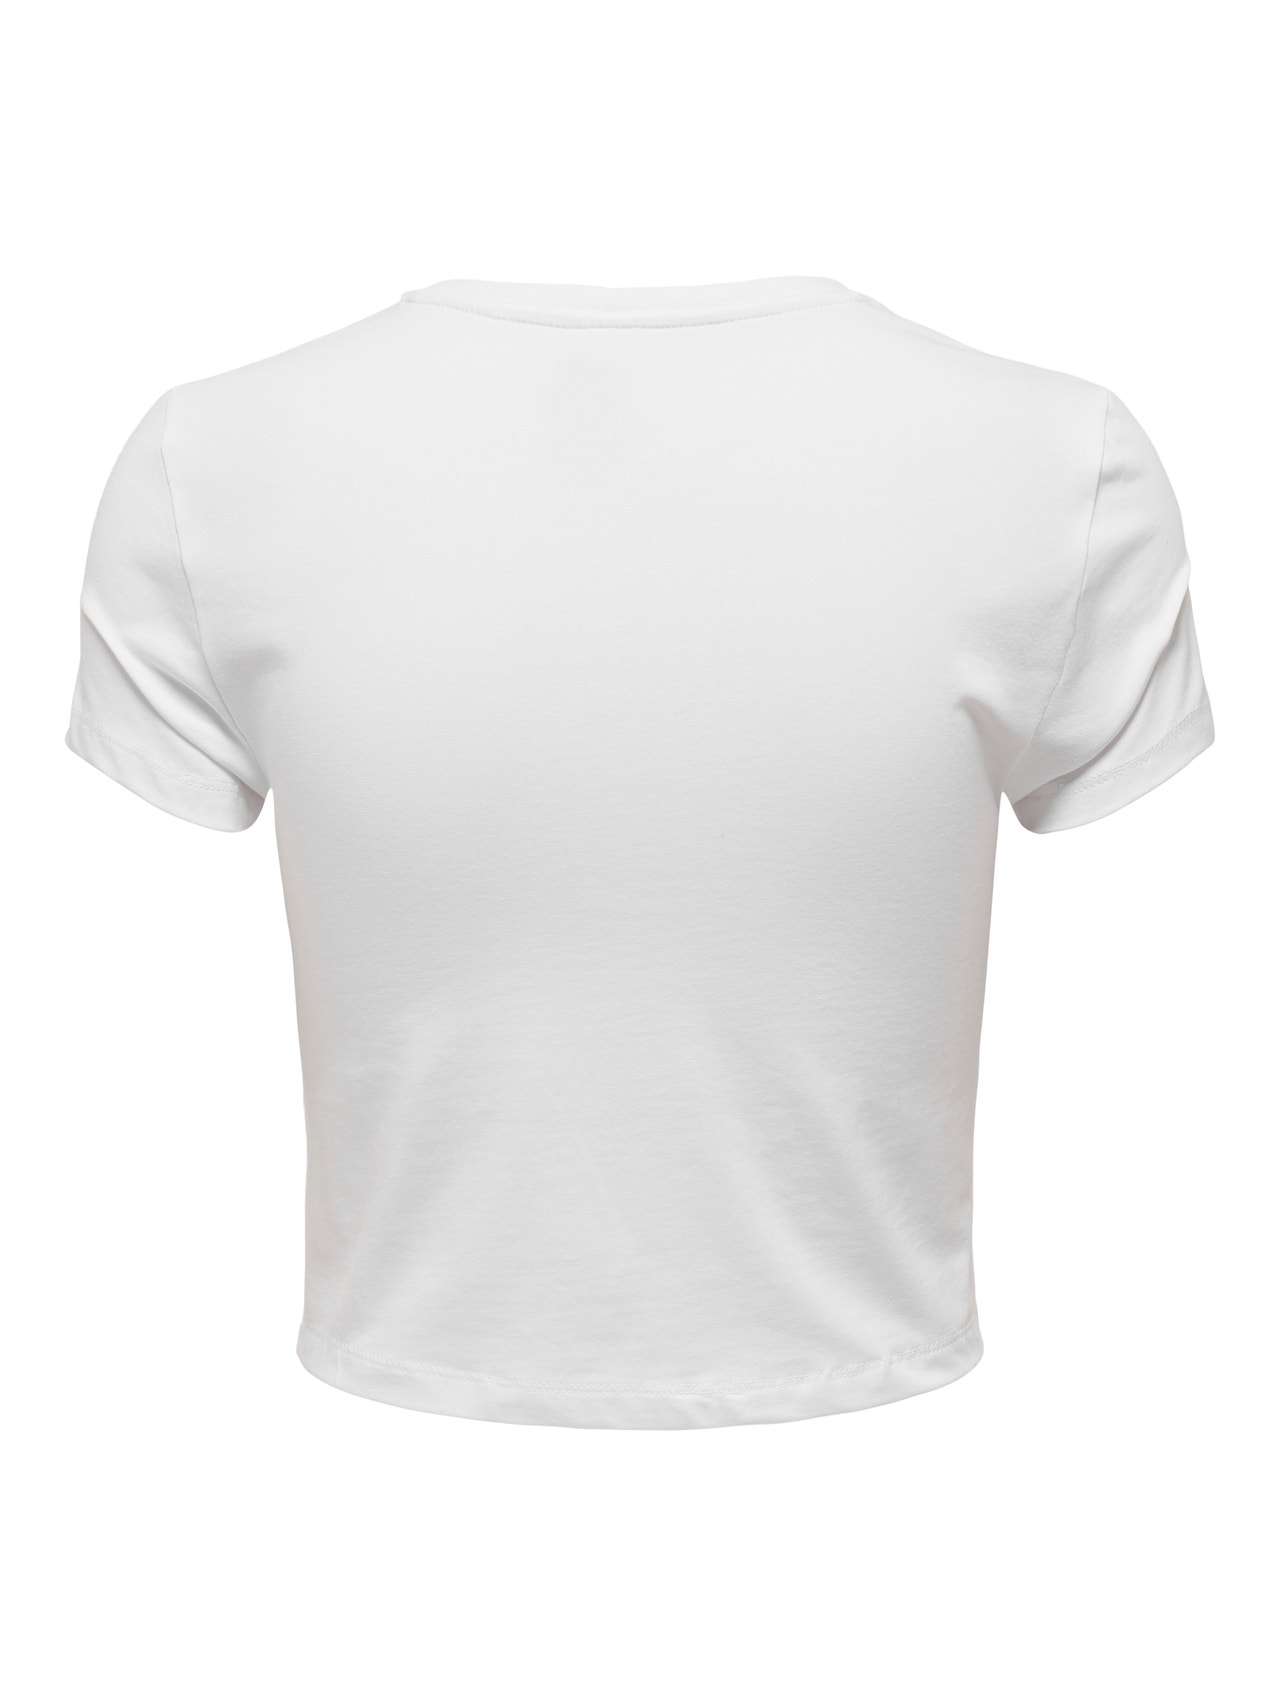 ONLY Regular Fit Round Neck T-Shirt -Bright White - 15296958